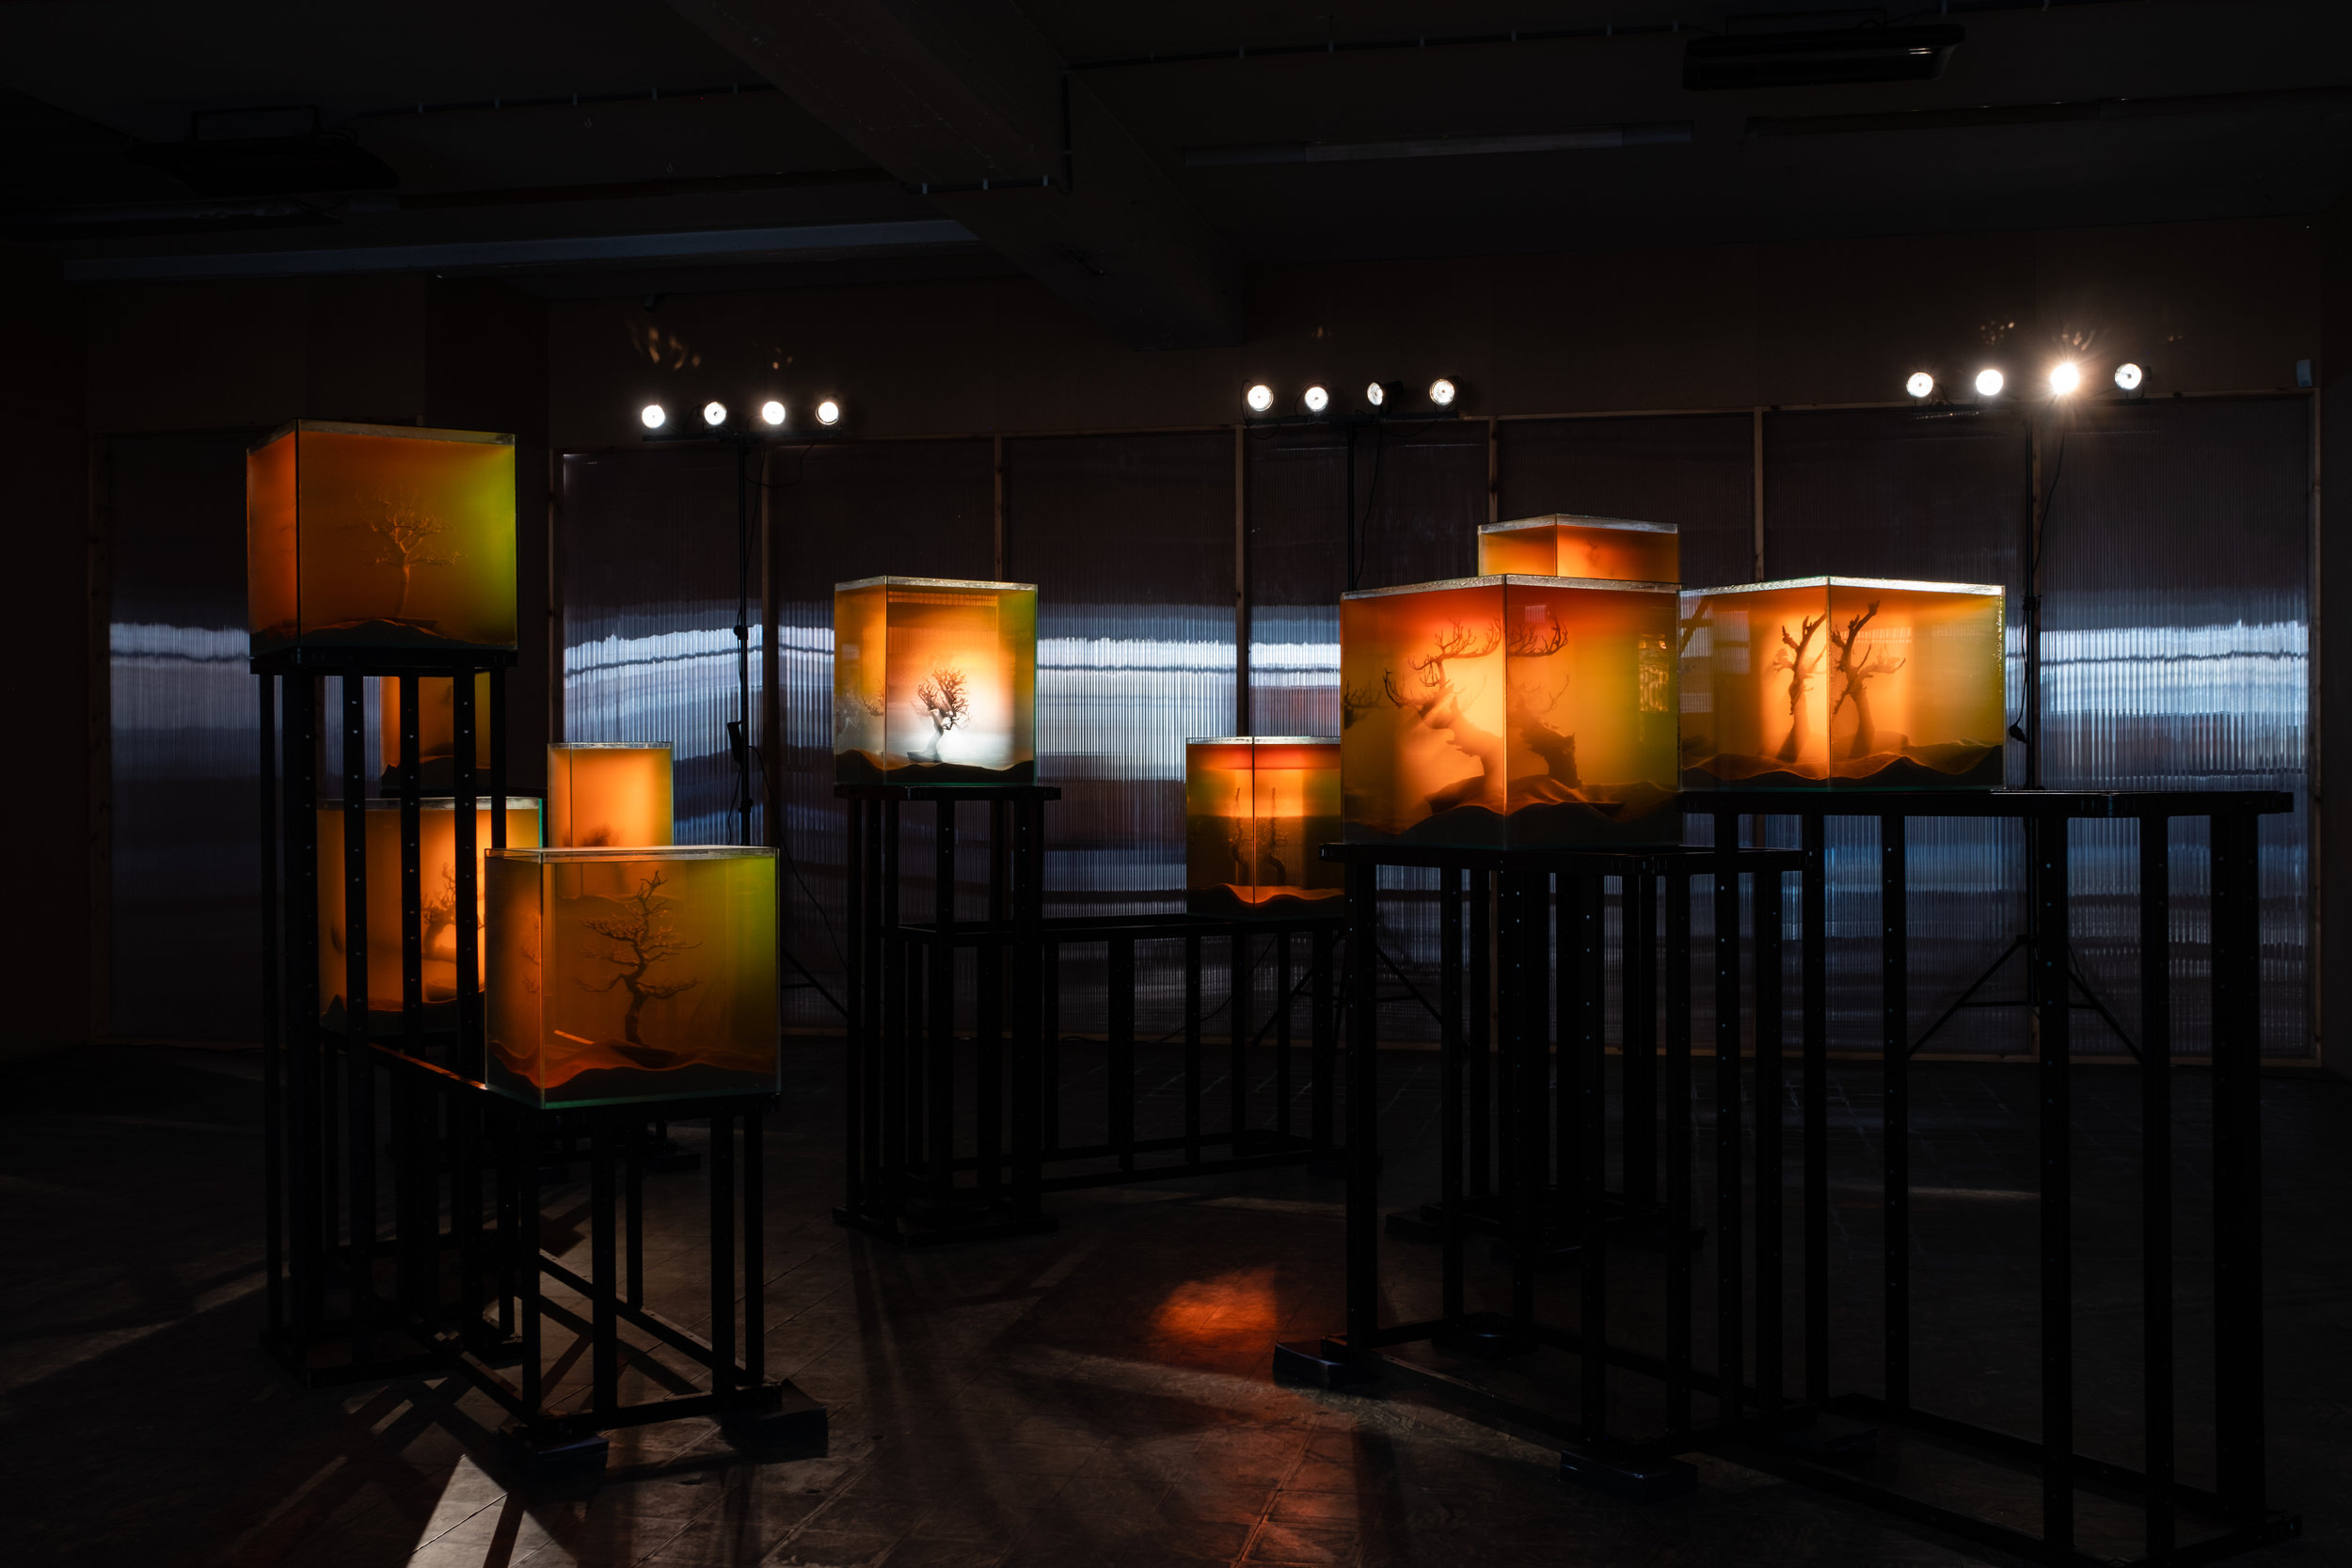 Various Artists, ‘toxiThropea.sunset’ (2019), in ‘Deadly Affairs’ (23.03-30.06.2019), Kunsthal Extra City, Antwerp, photo by Tomas Uyttendaele_1.jpg